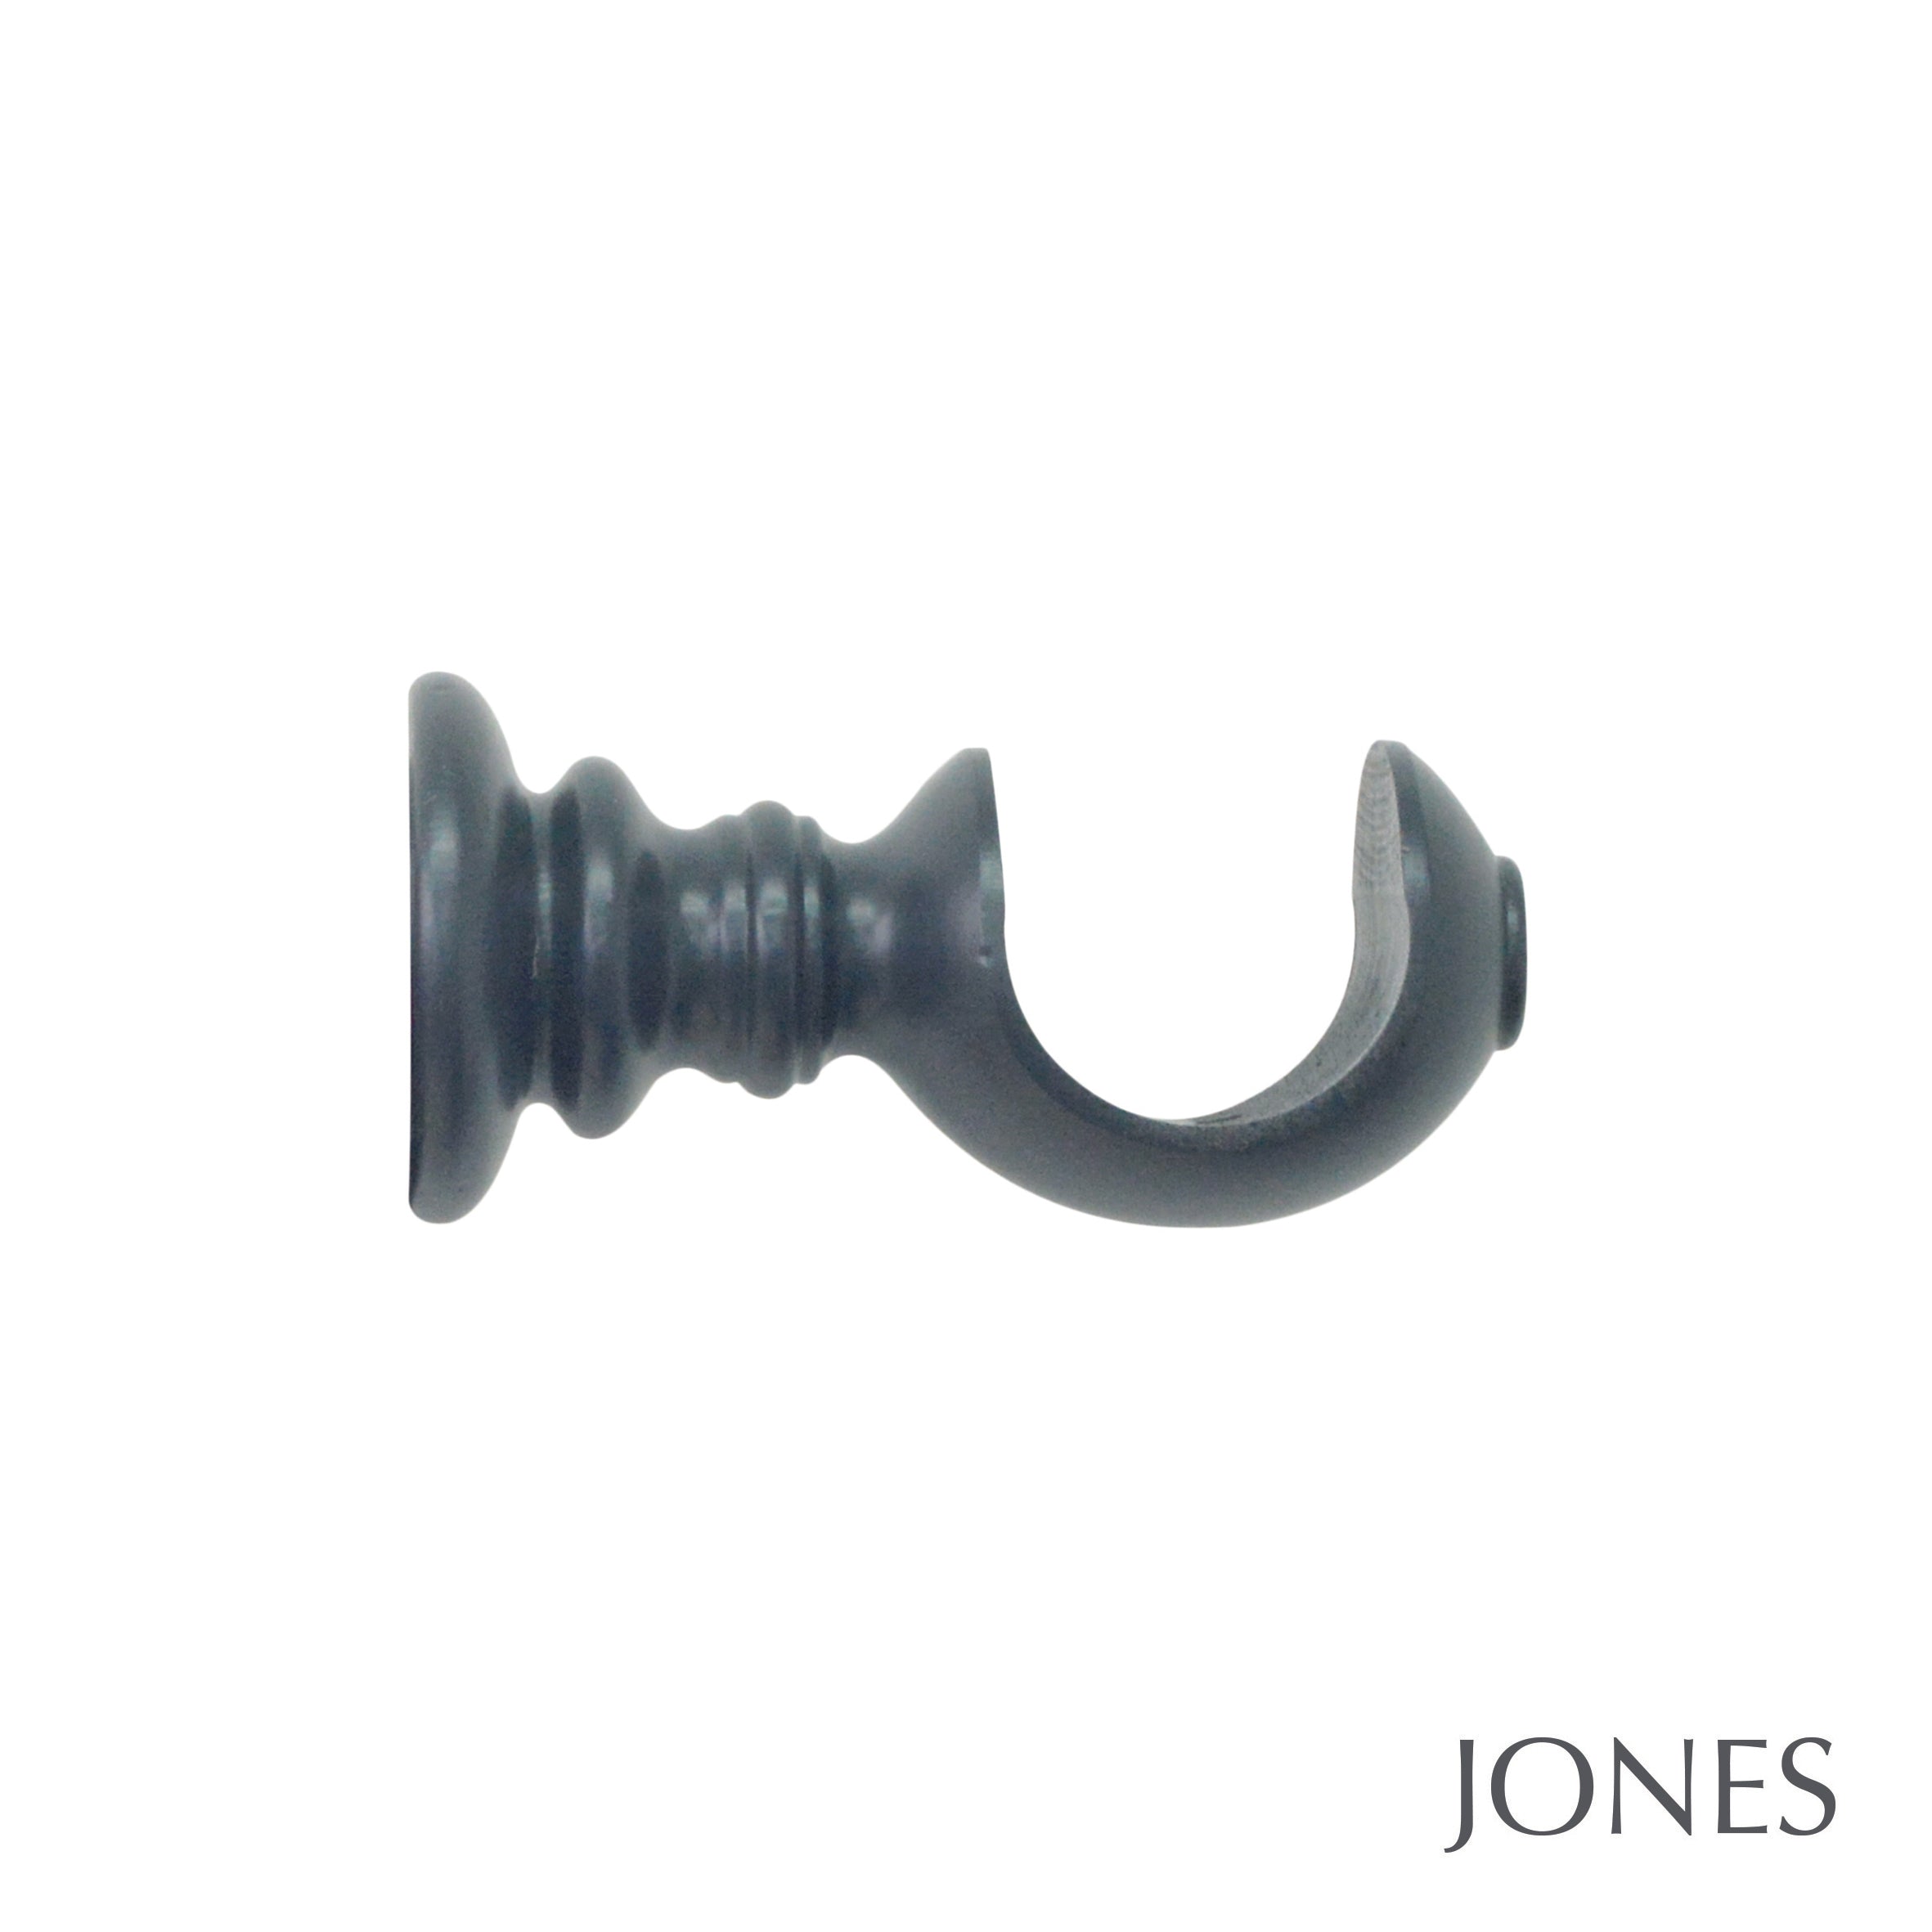 Jones Interiors Estate Ribbed Ball Finial Curtain Pole Set in Airforce